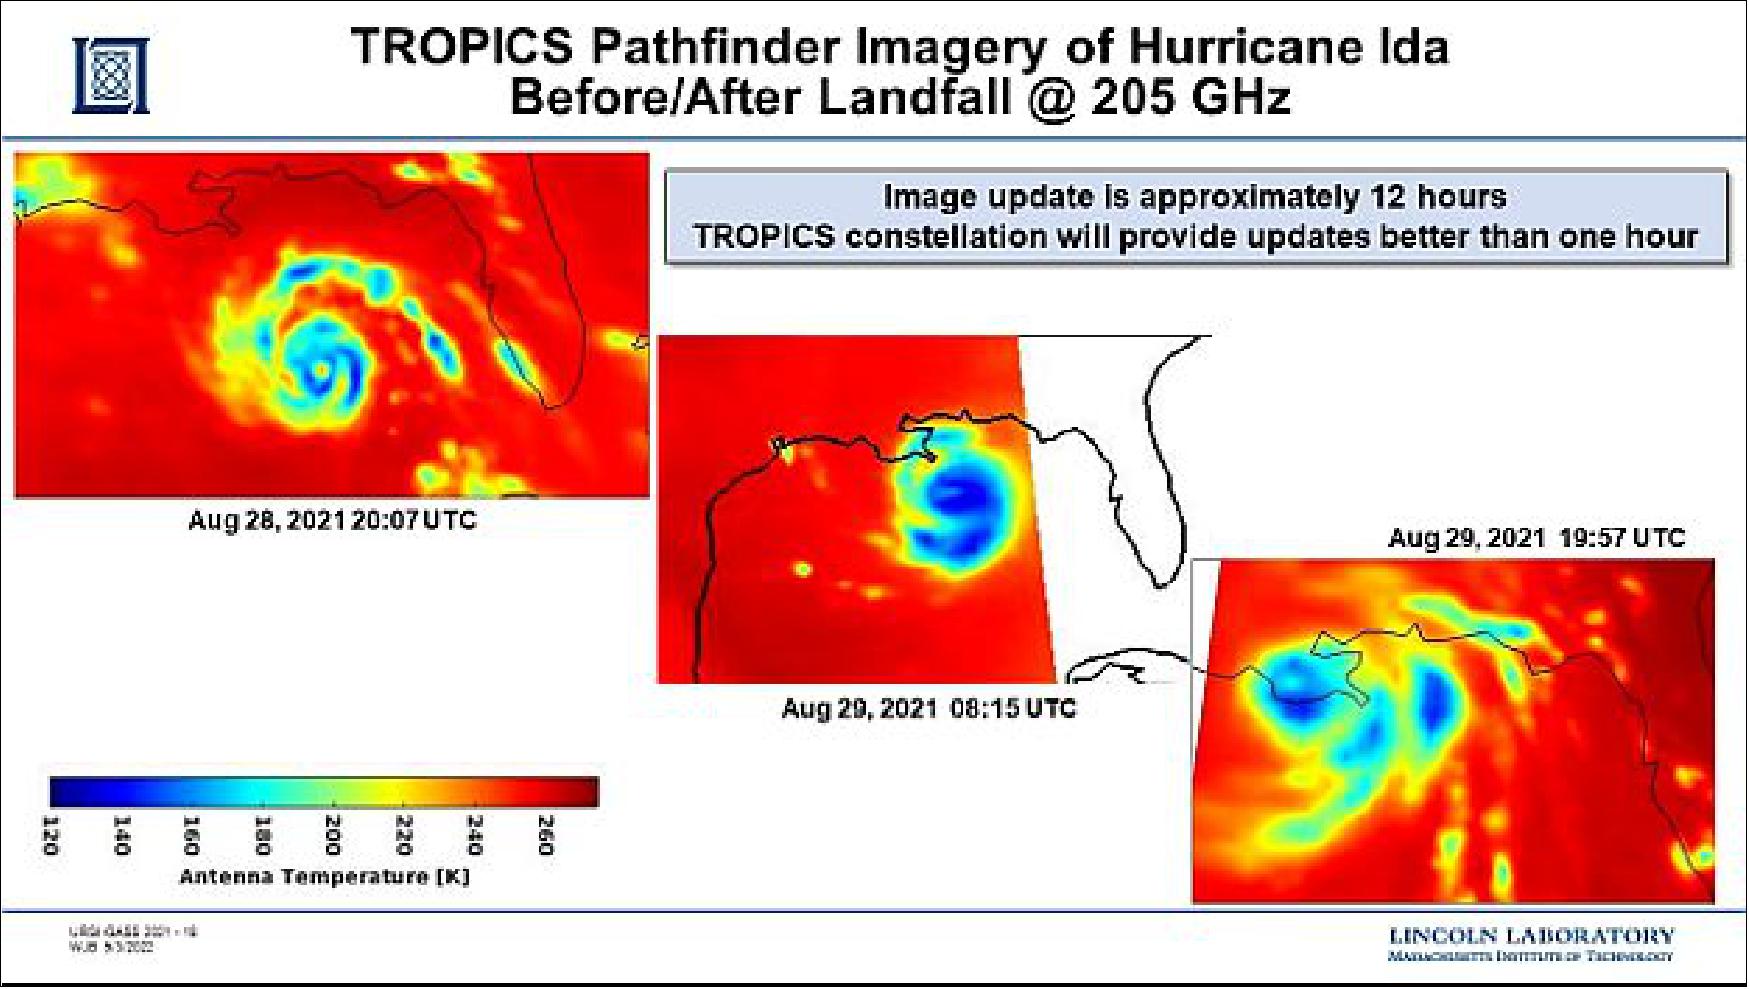 Figure 7: Images of Hurricane Ida before landfall (left) show a well-defined eye of the storm, as well as inner and outer rainbands that persisted as the storm made landfall in Louisiana (right), image credits: NASA / TROPICS Pathfinder satellite